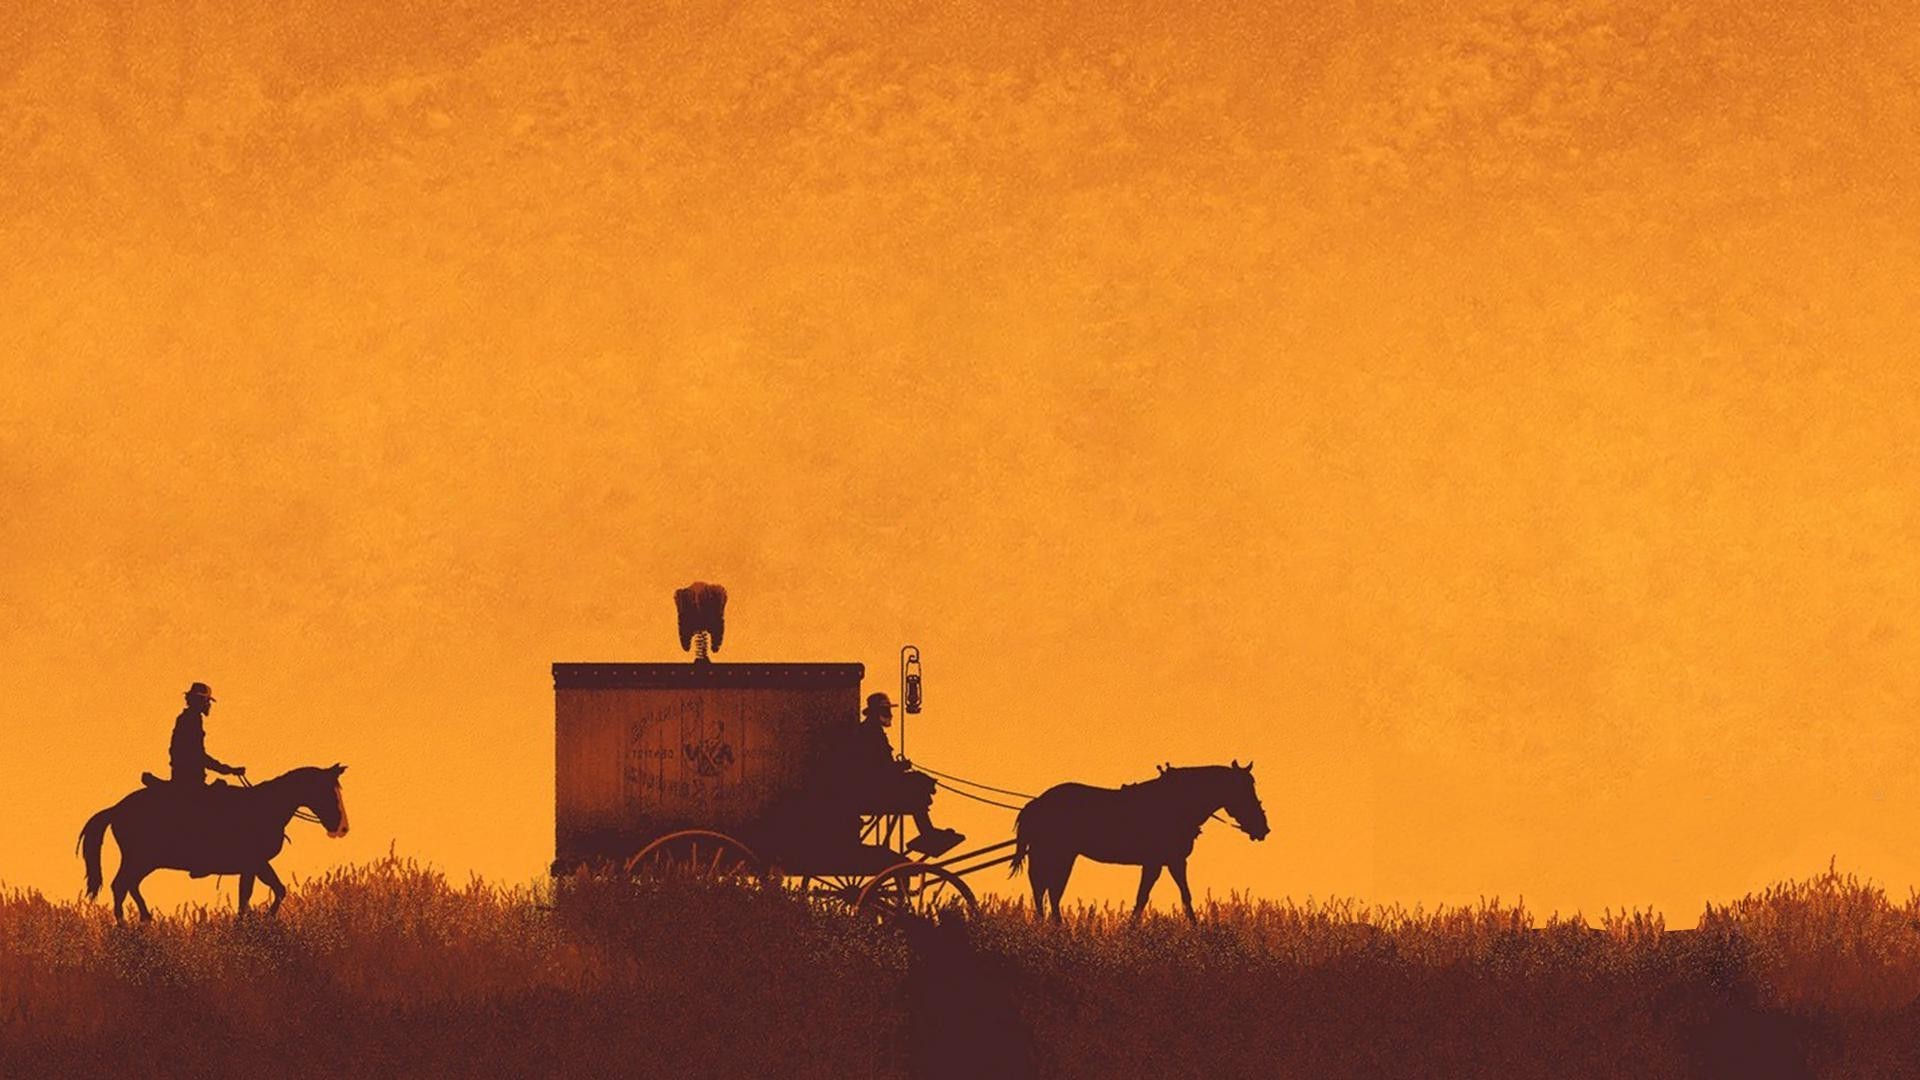 1920x1080 Django Unchained, Quentin Tarantino, Movies, Orange, Horse, Carriage  Wallpapers HD / Desktop and Mobile Backgrounds